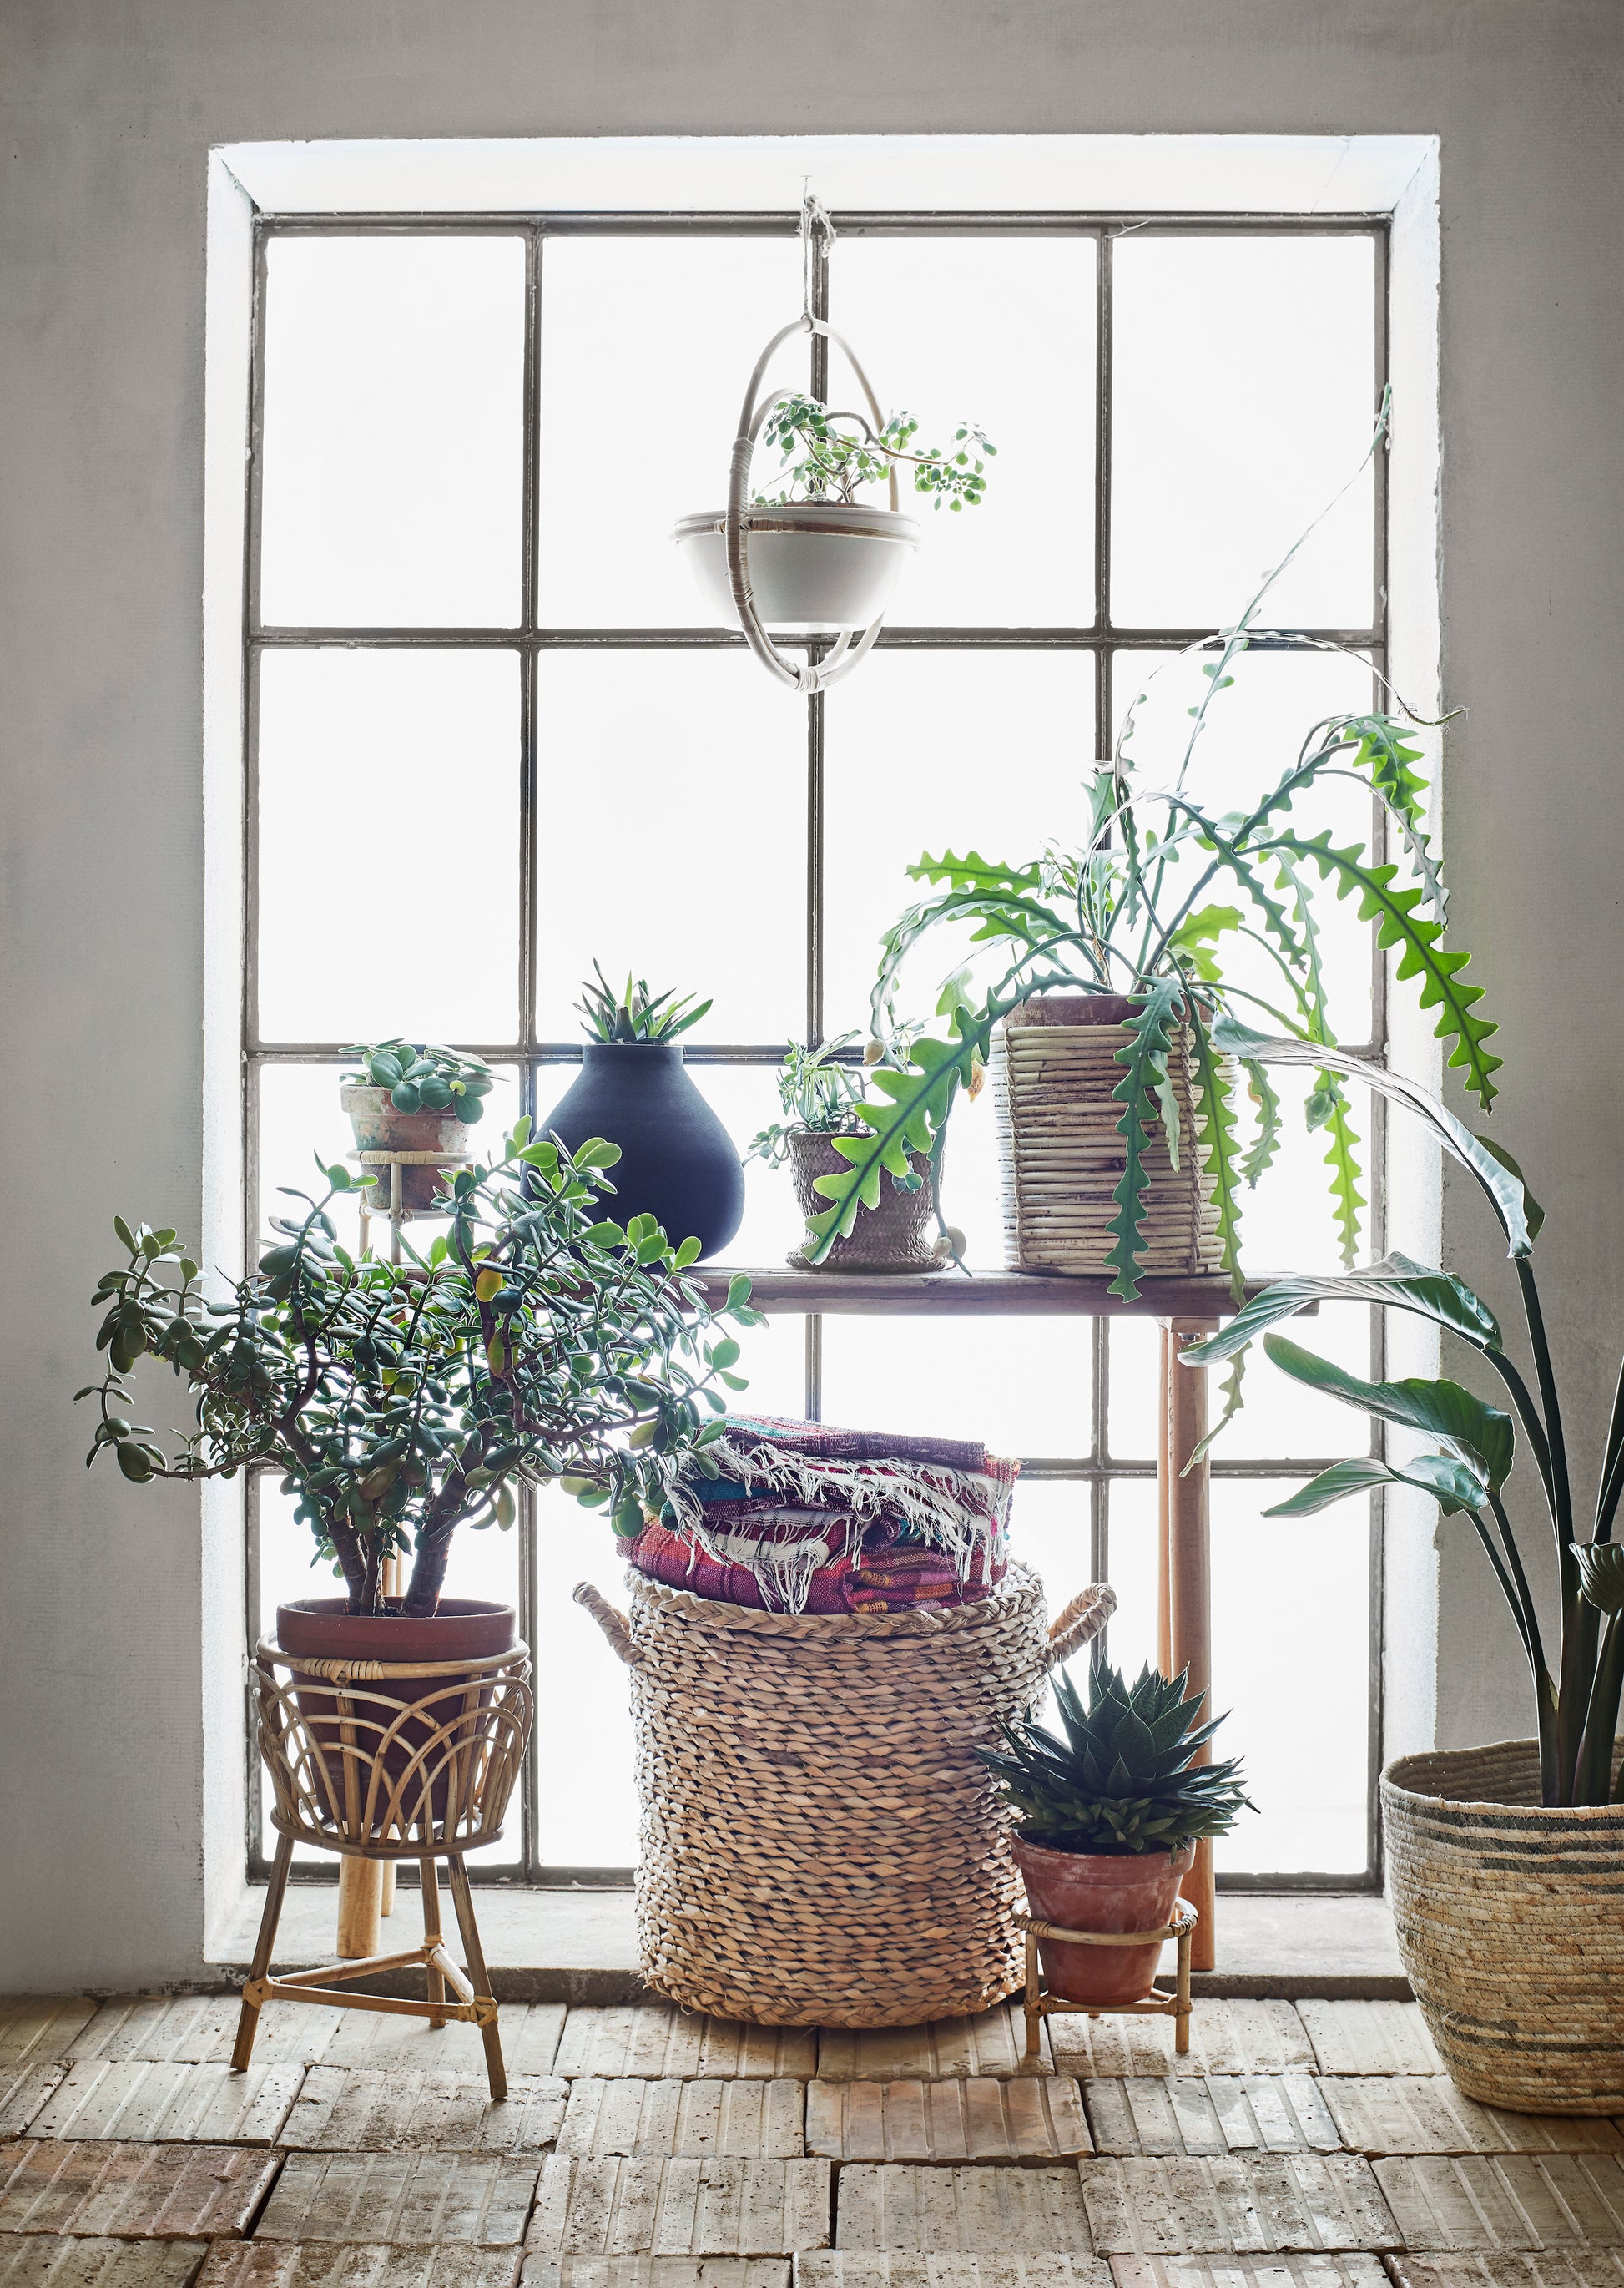 large window with a small wooden table in front of it, with lots of plants on top of and in front of the table